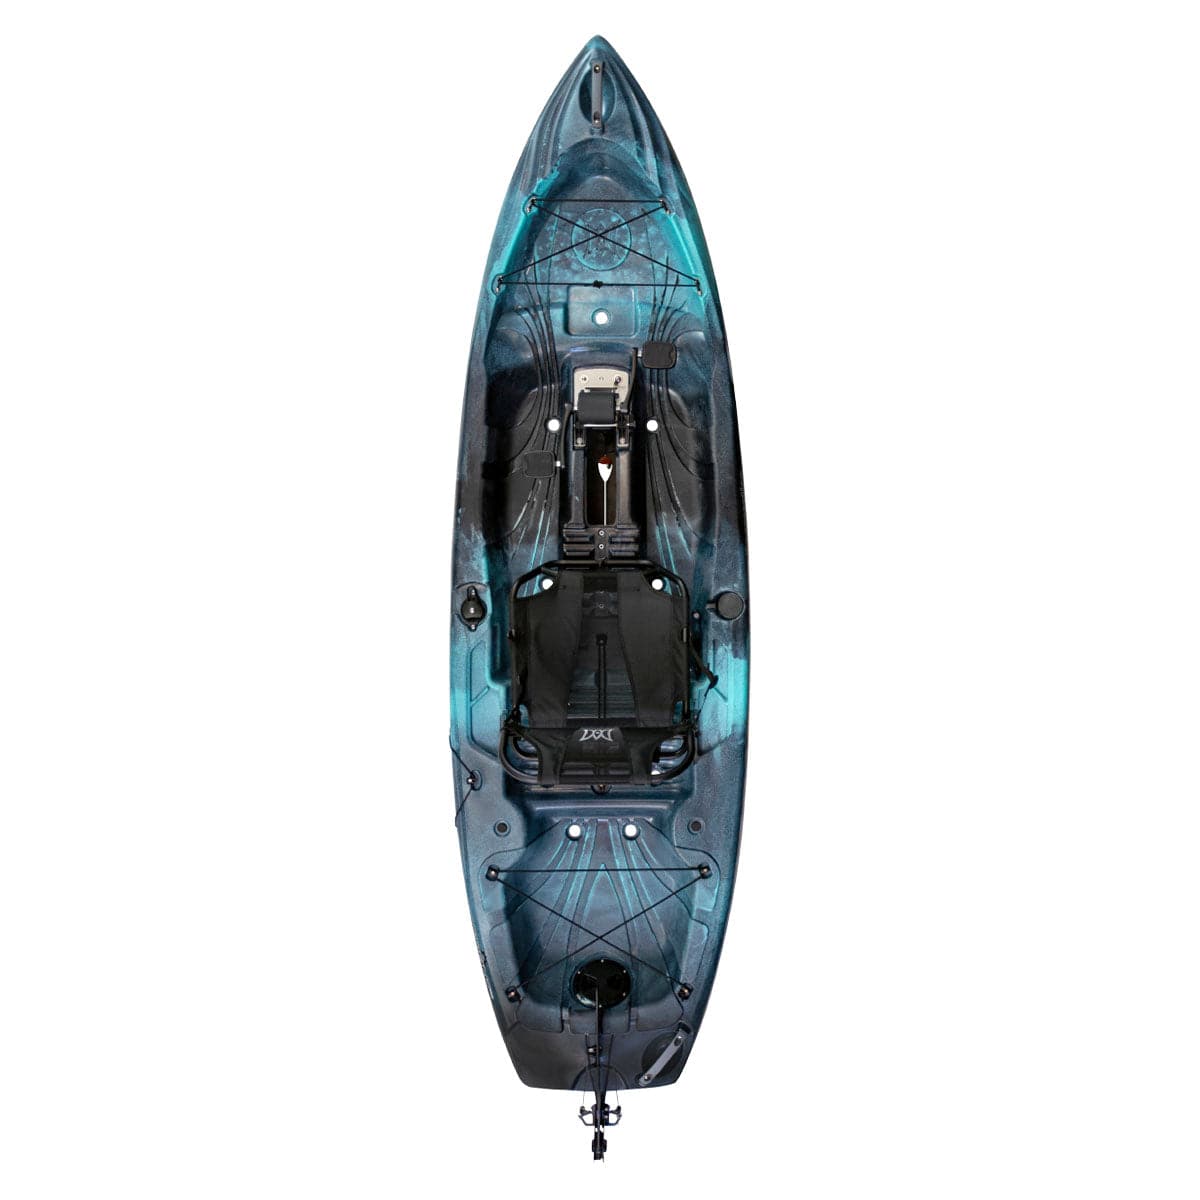 Featuring the Crank 10 fishing kayak, pedal drive kayak manufactured by Perception shown here from a third angle.